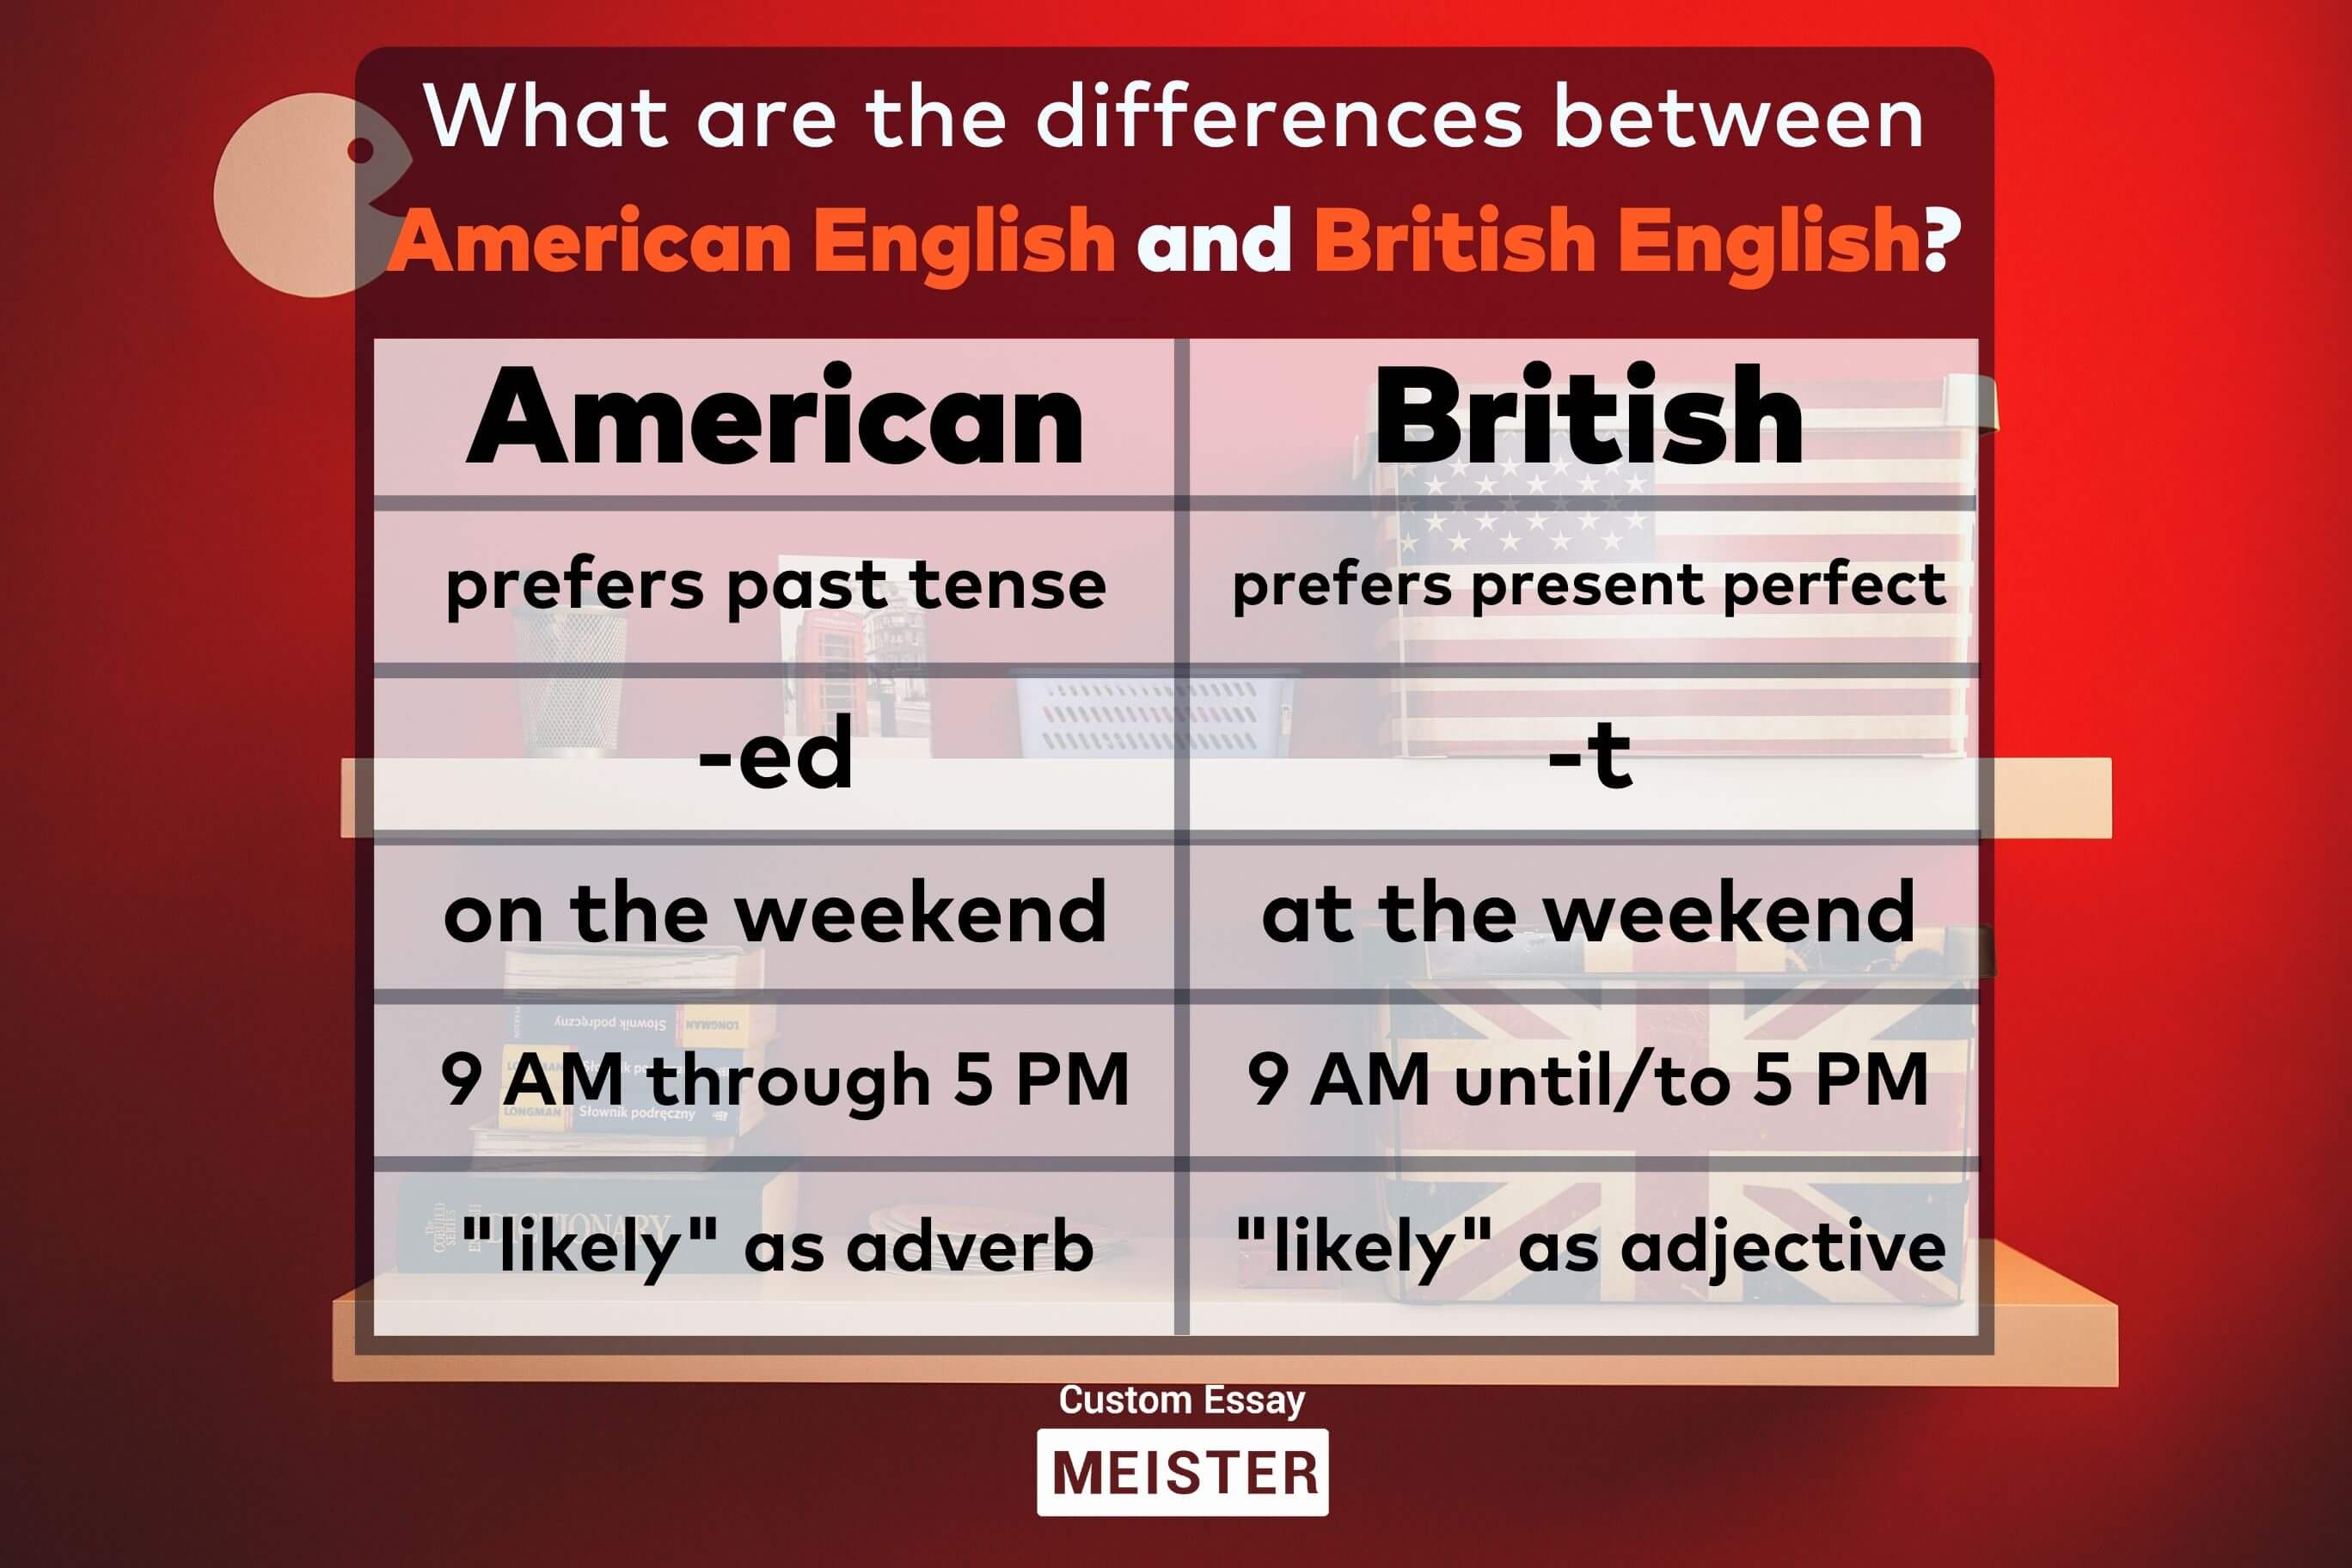 What are the differences between American, British, and Italian